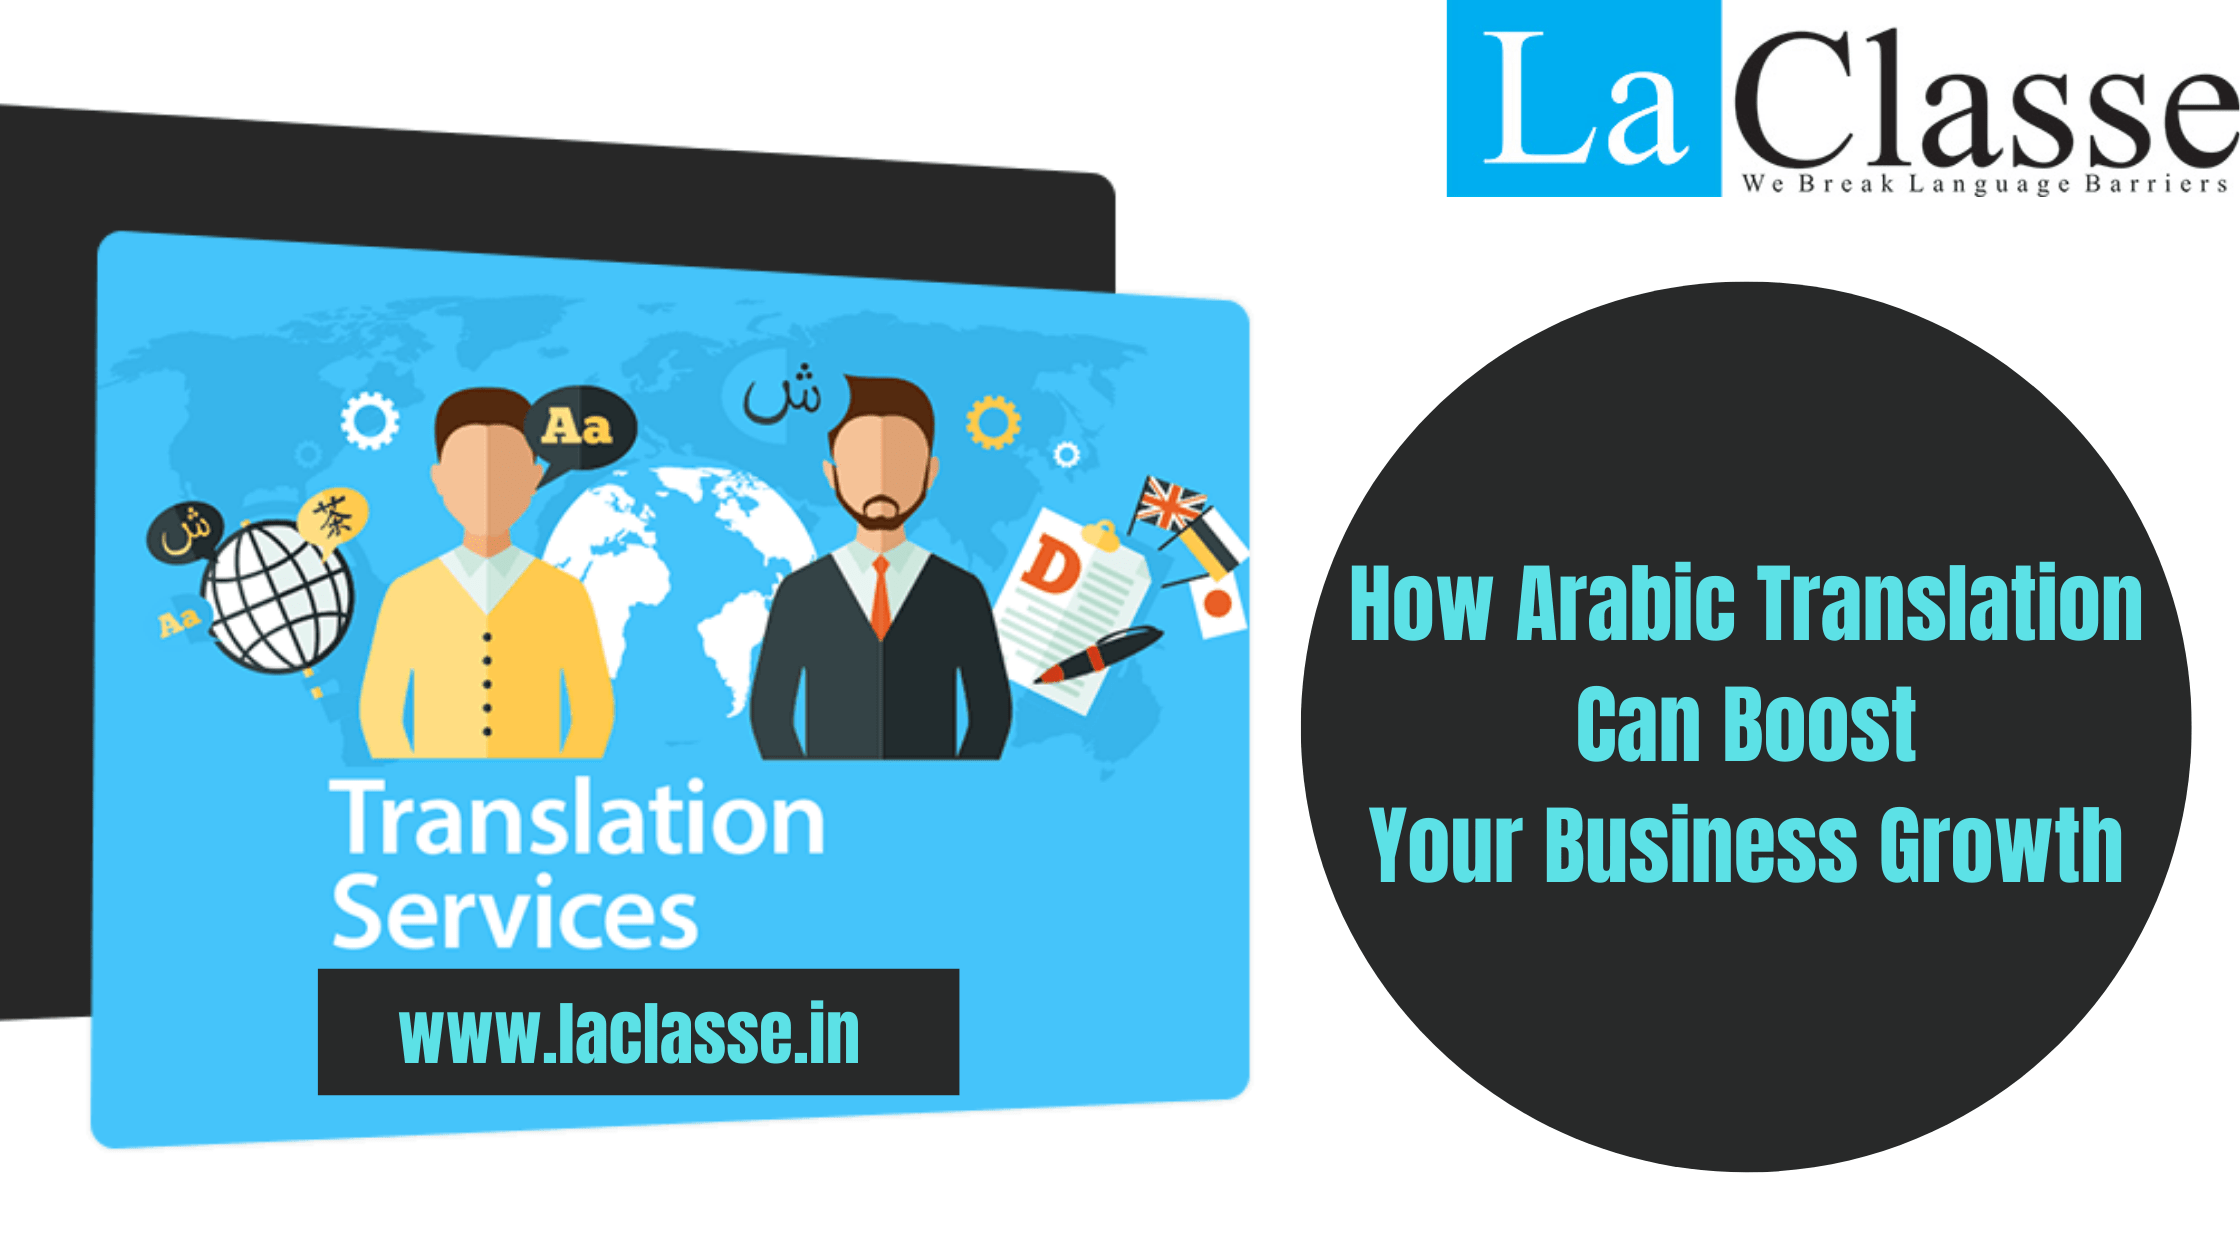 How Arabic Translation Can Boost Your Business Growth